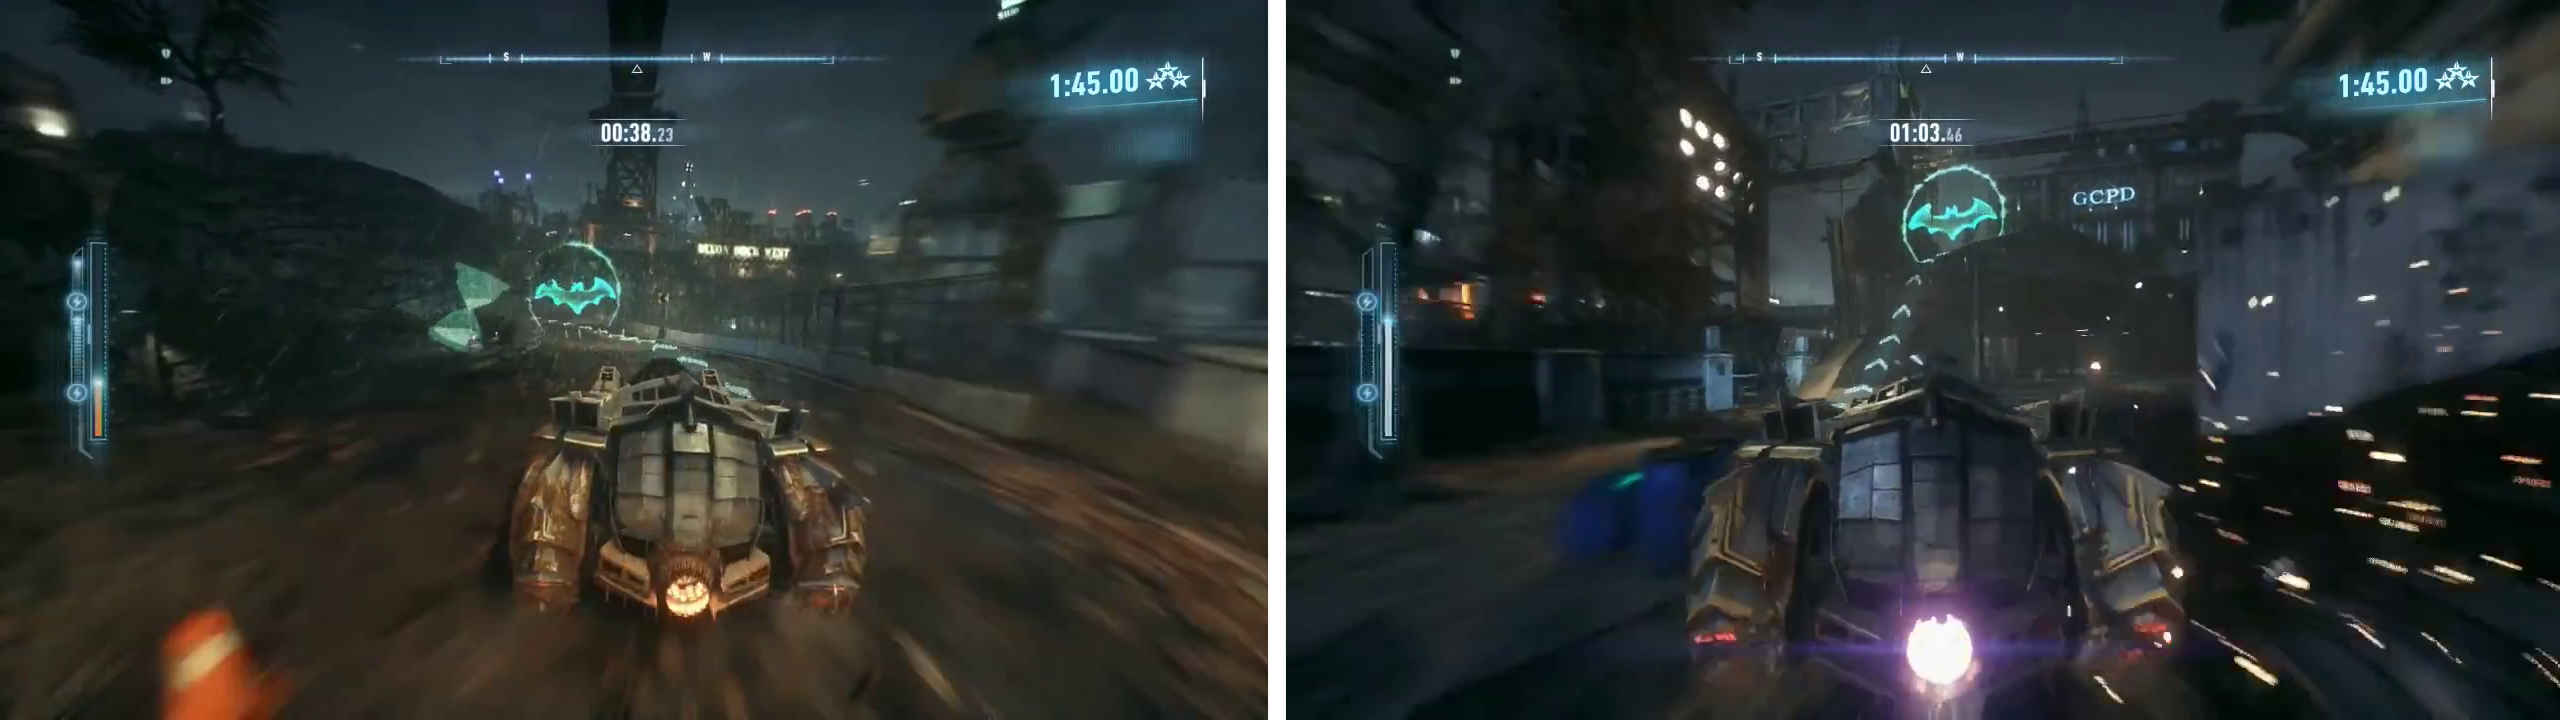 Only pick up the hourglass icons when necessary (left). Make sure you boost up this ramp to make a short jump (right).